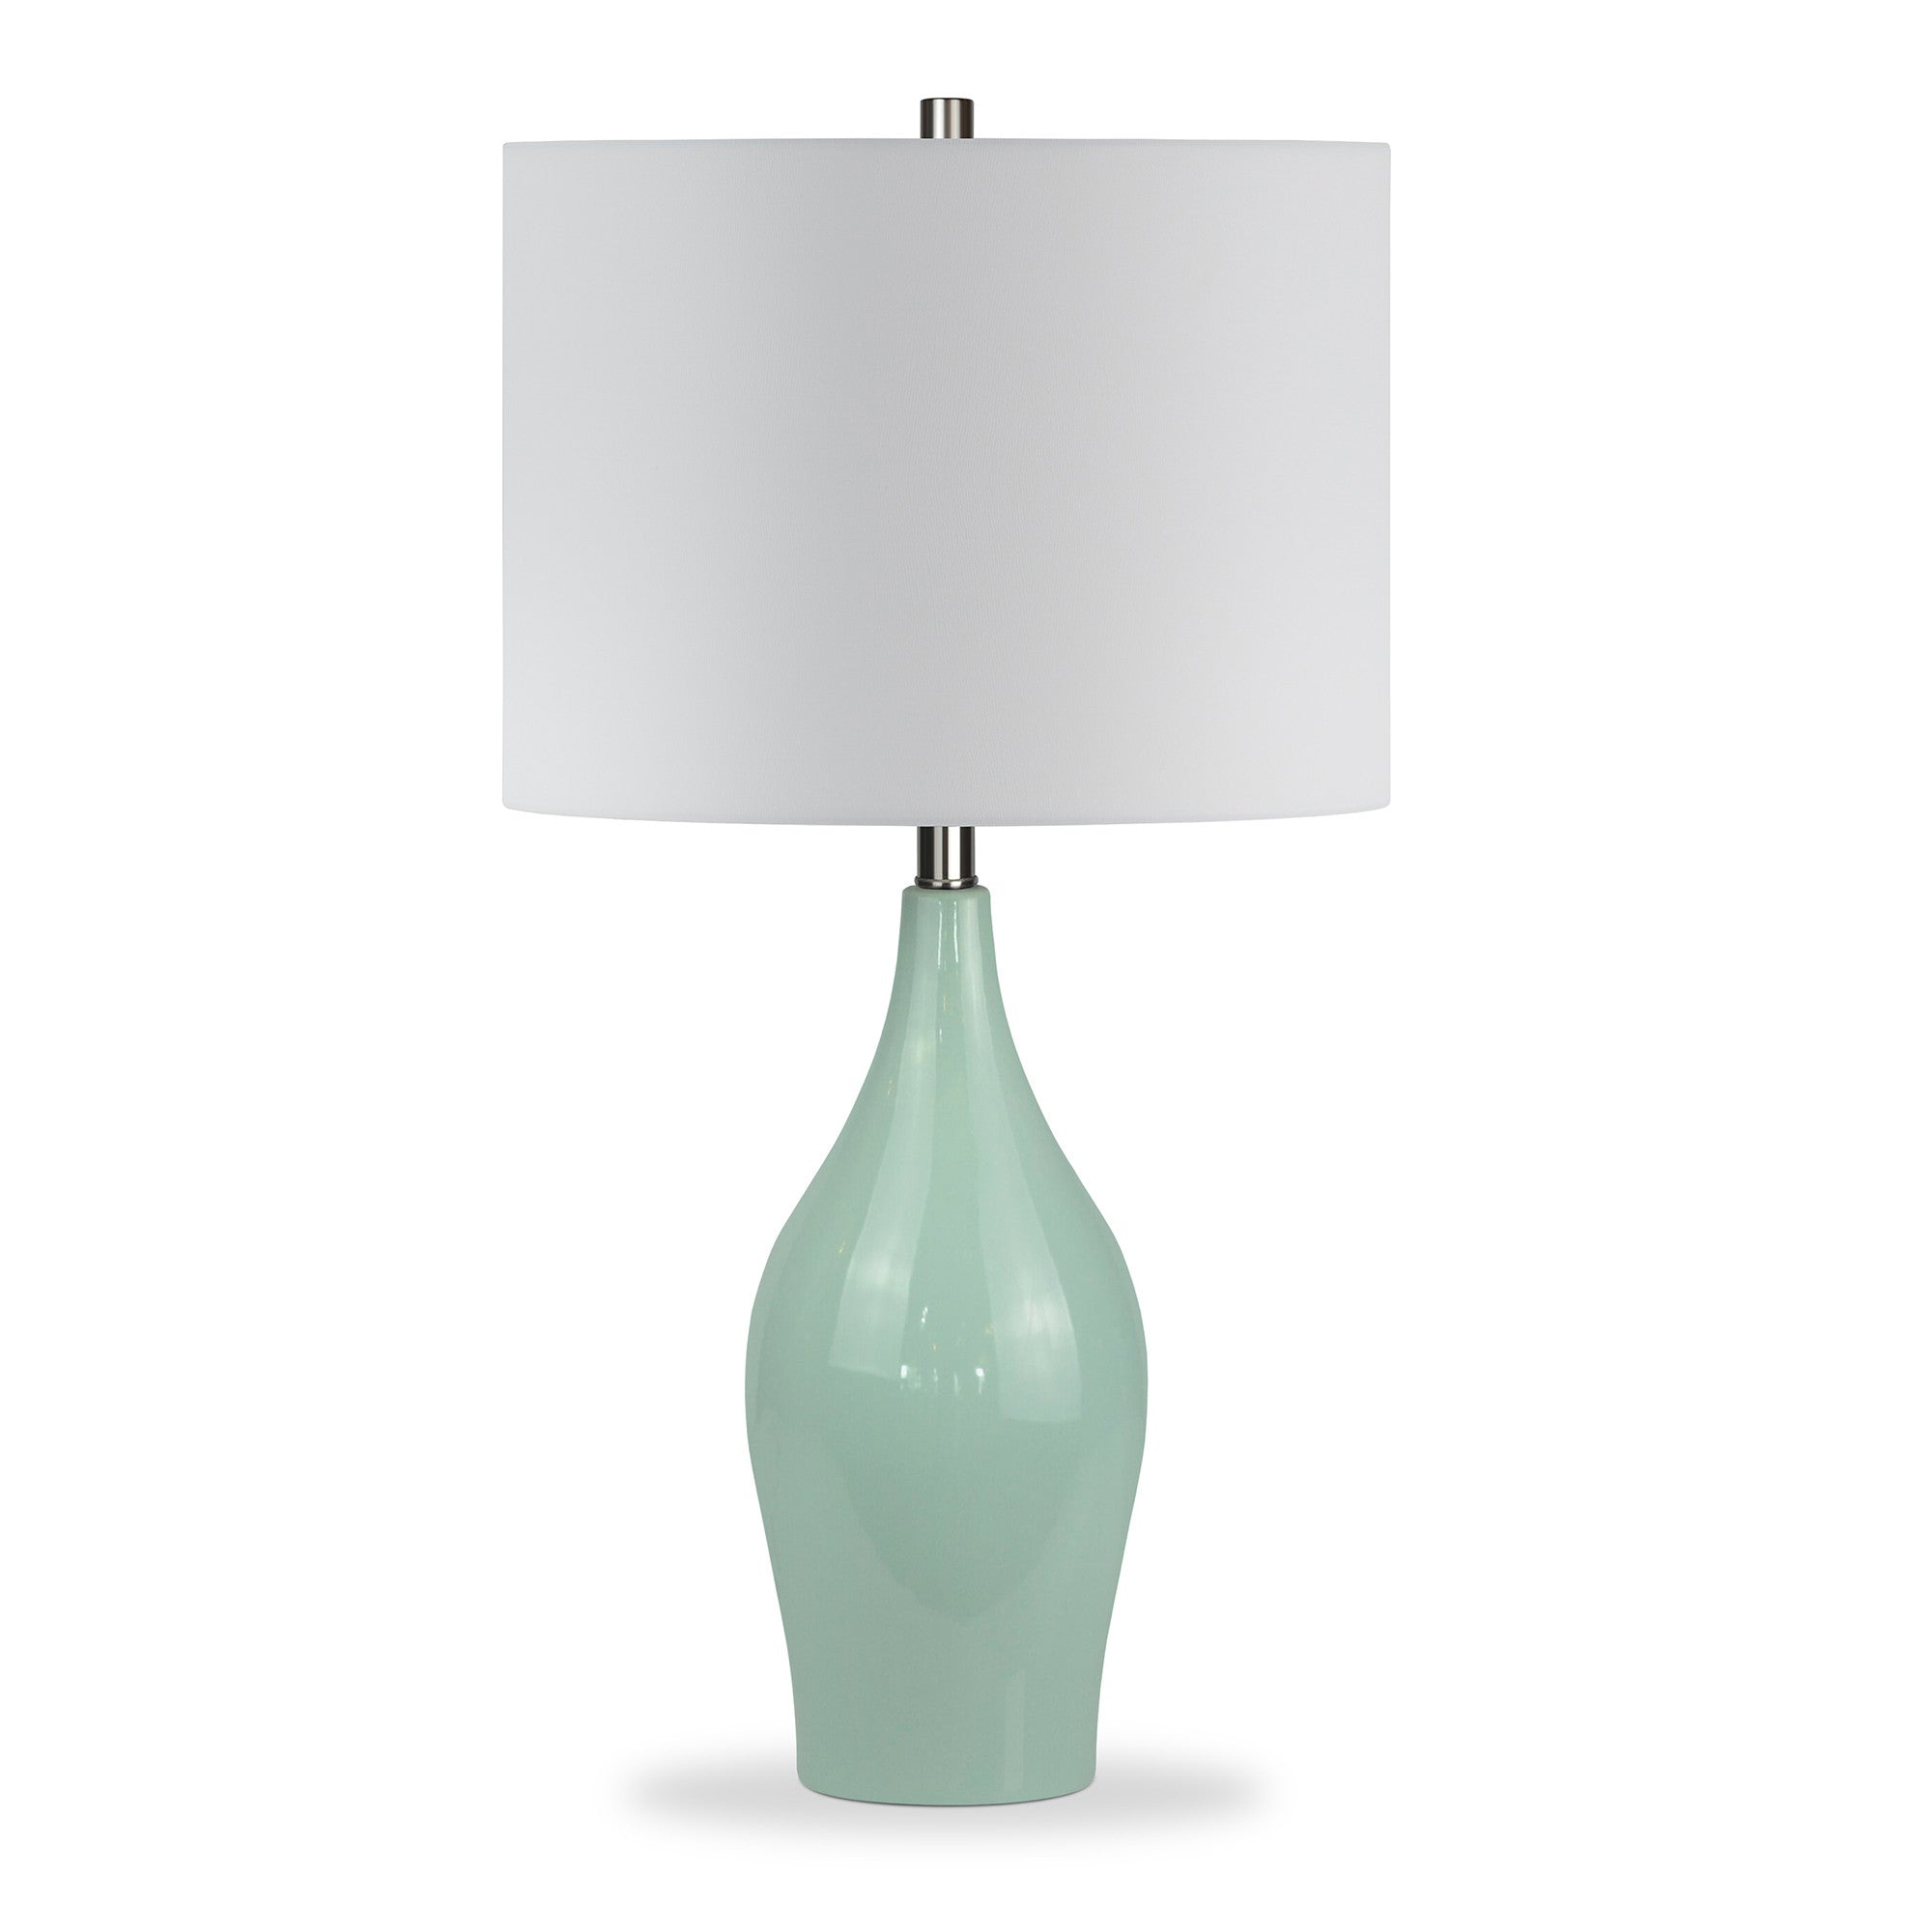 28" Teal Blue Porcelain Table Lamp With White Drum Shade